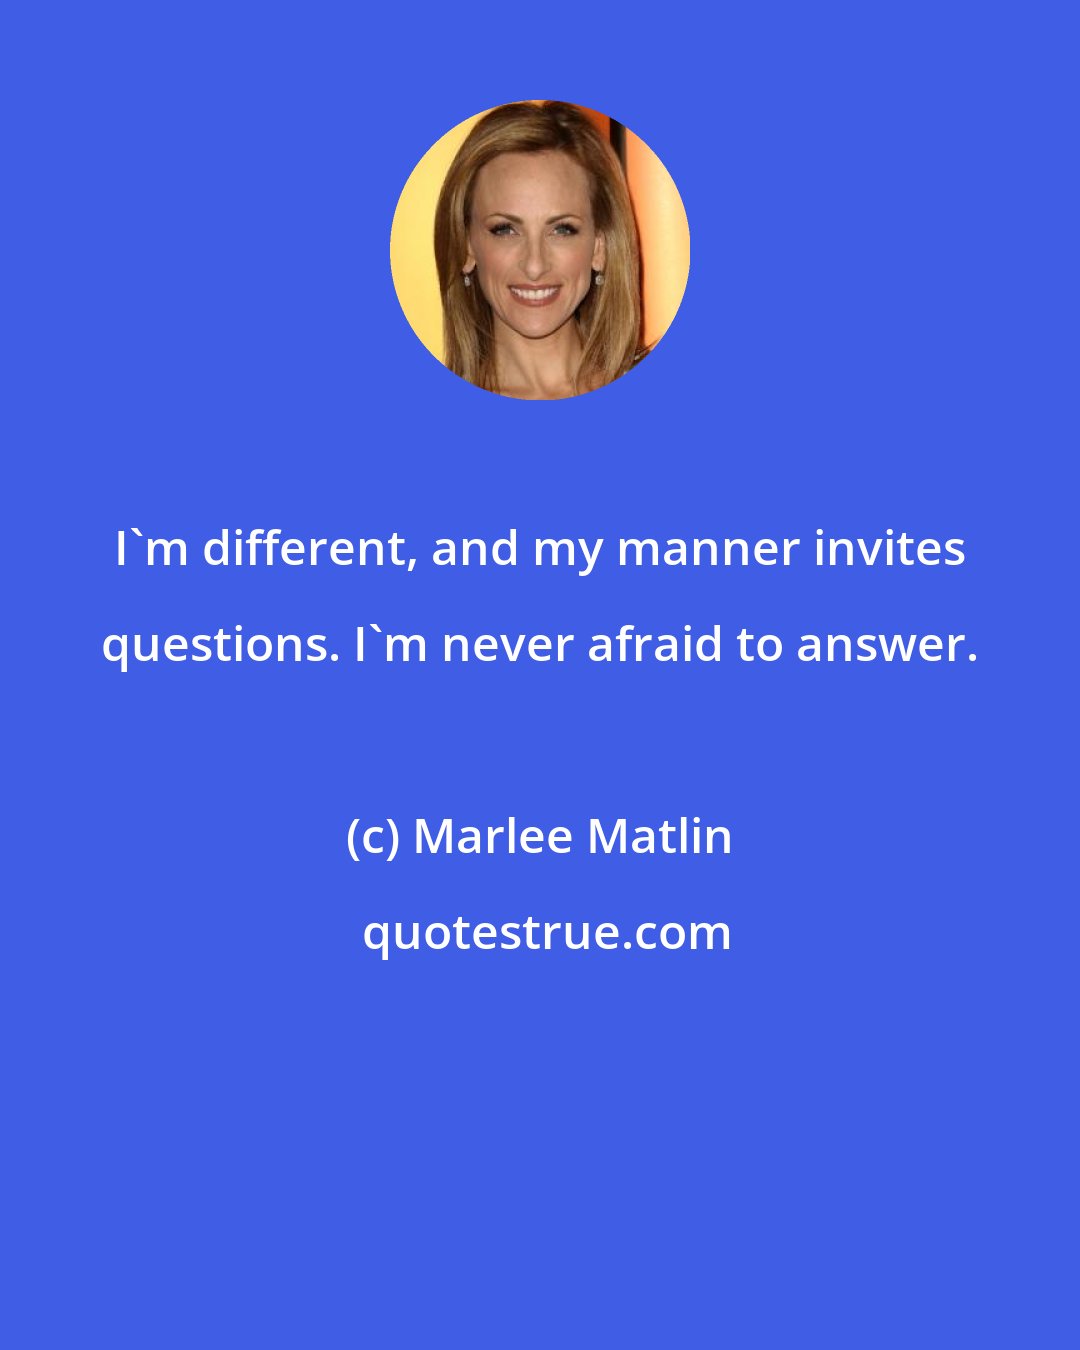 Marlee Matlin: I'm different, and my manner invites questions. I'm never afraid to answer.